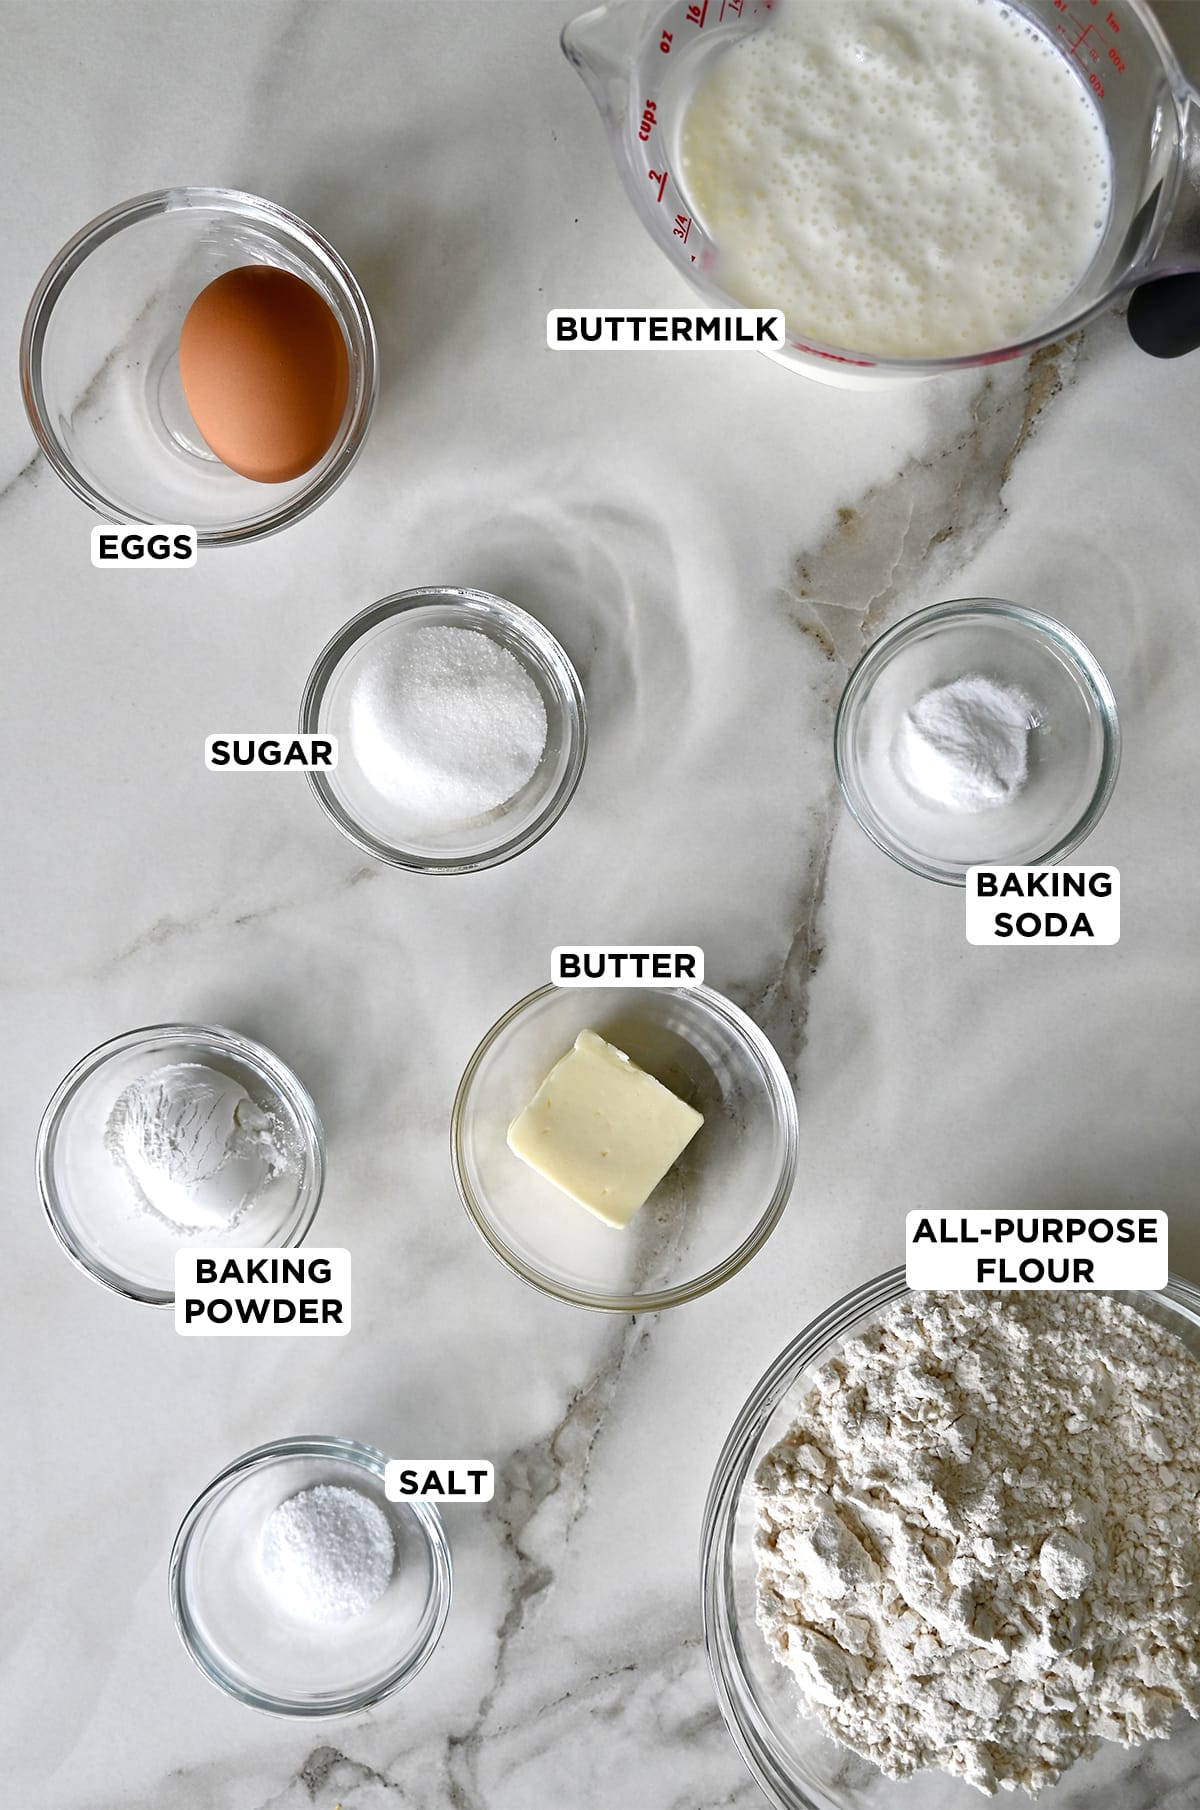 Various sizes of glass bowls containing these ingredients: buttermilk, baking soda, all-purpose flour, butter, salt, baking powder, sugar and a whole egg.